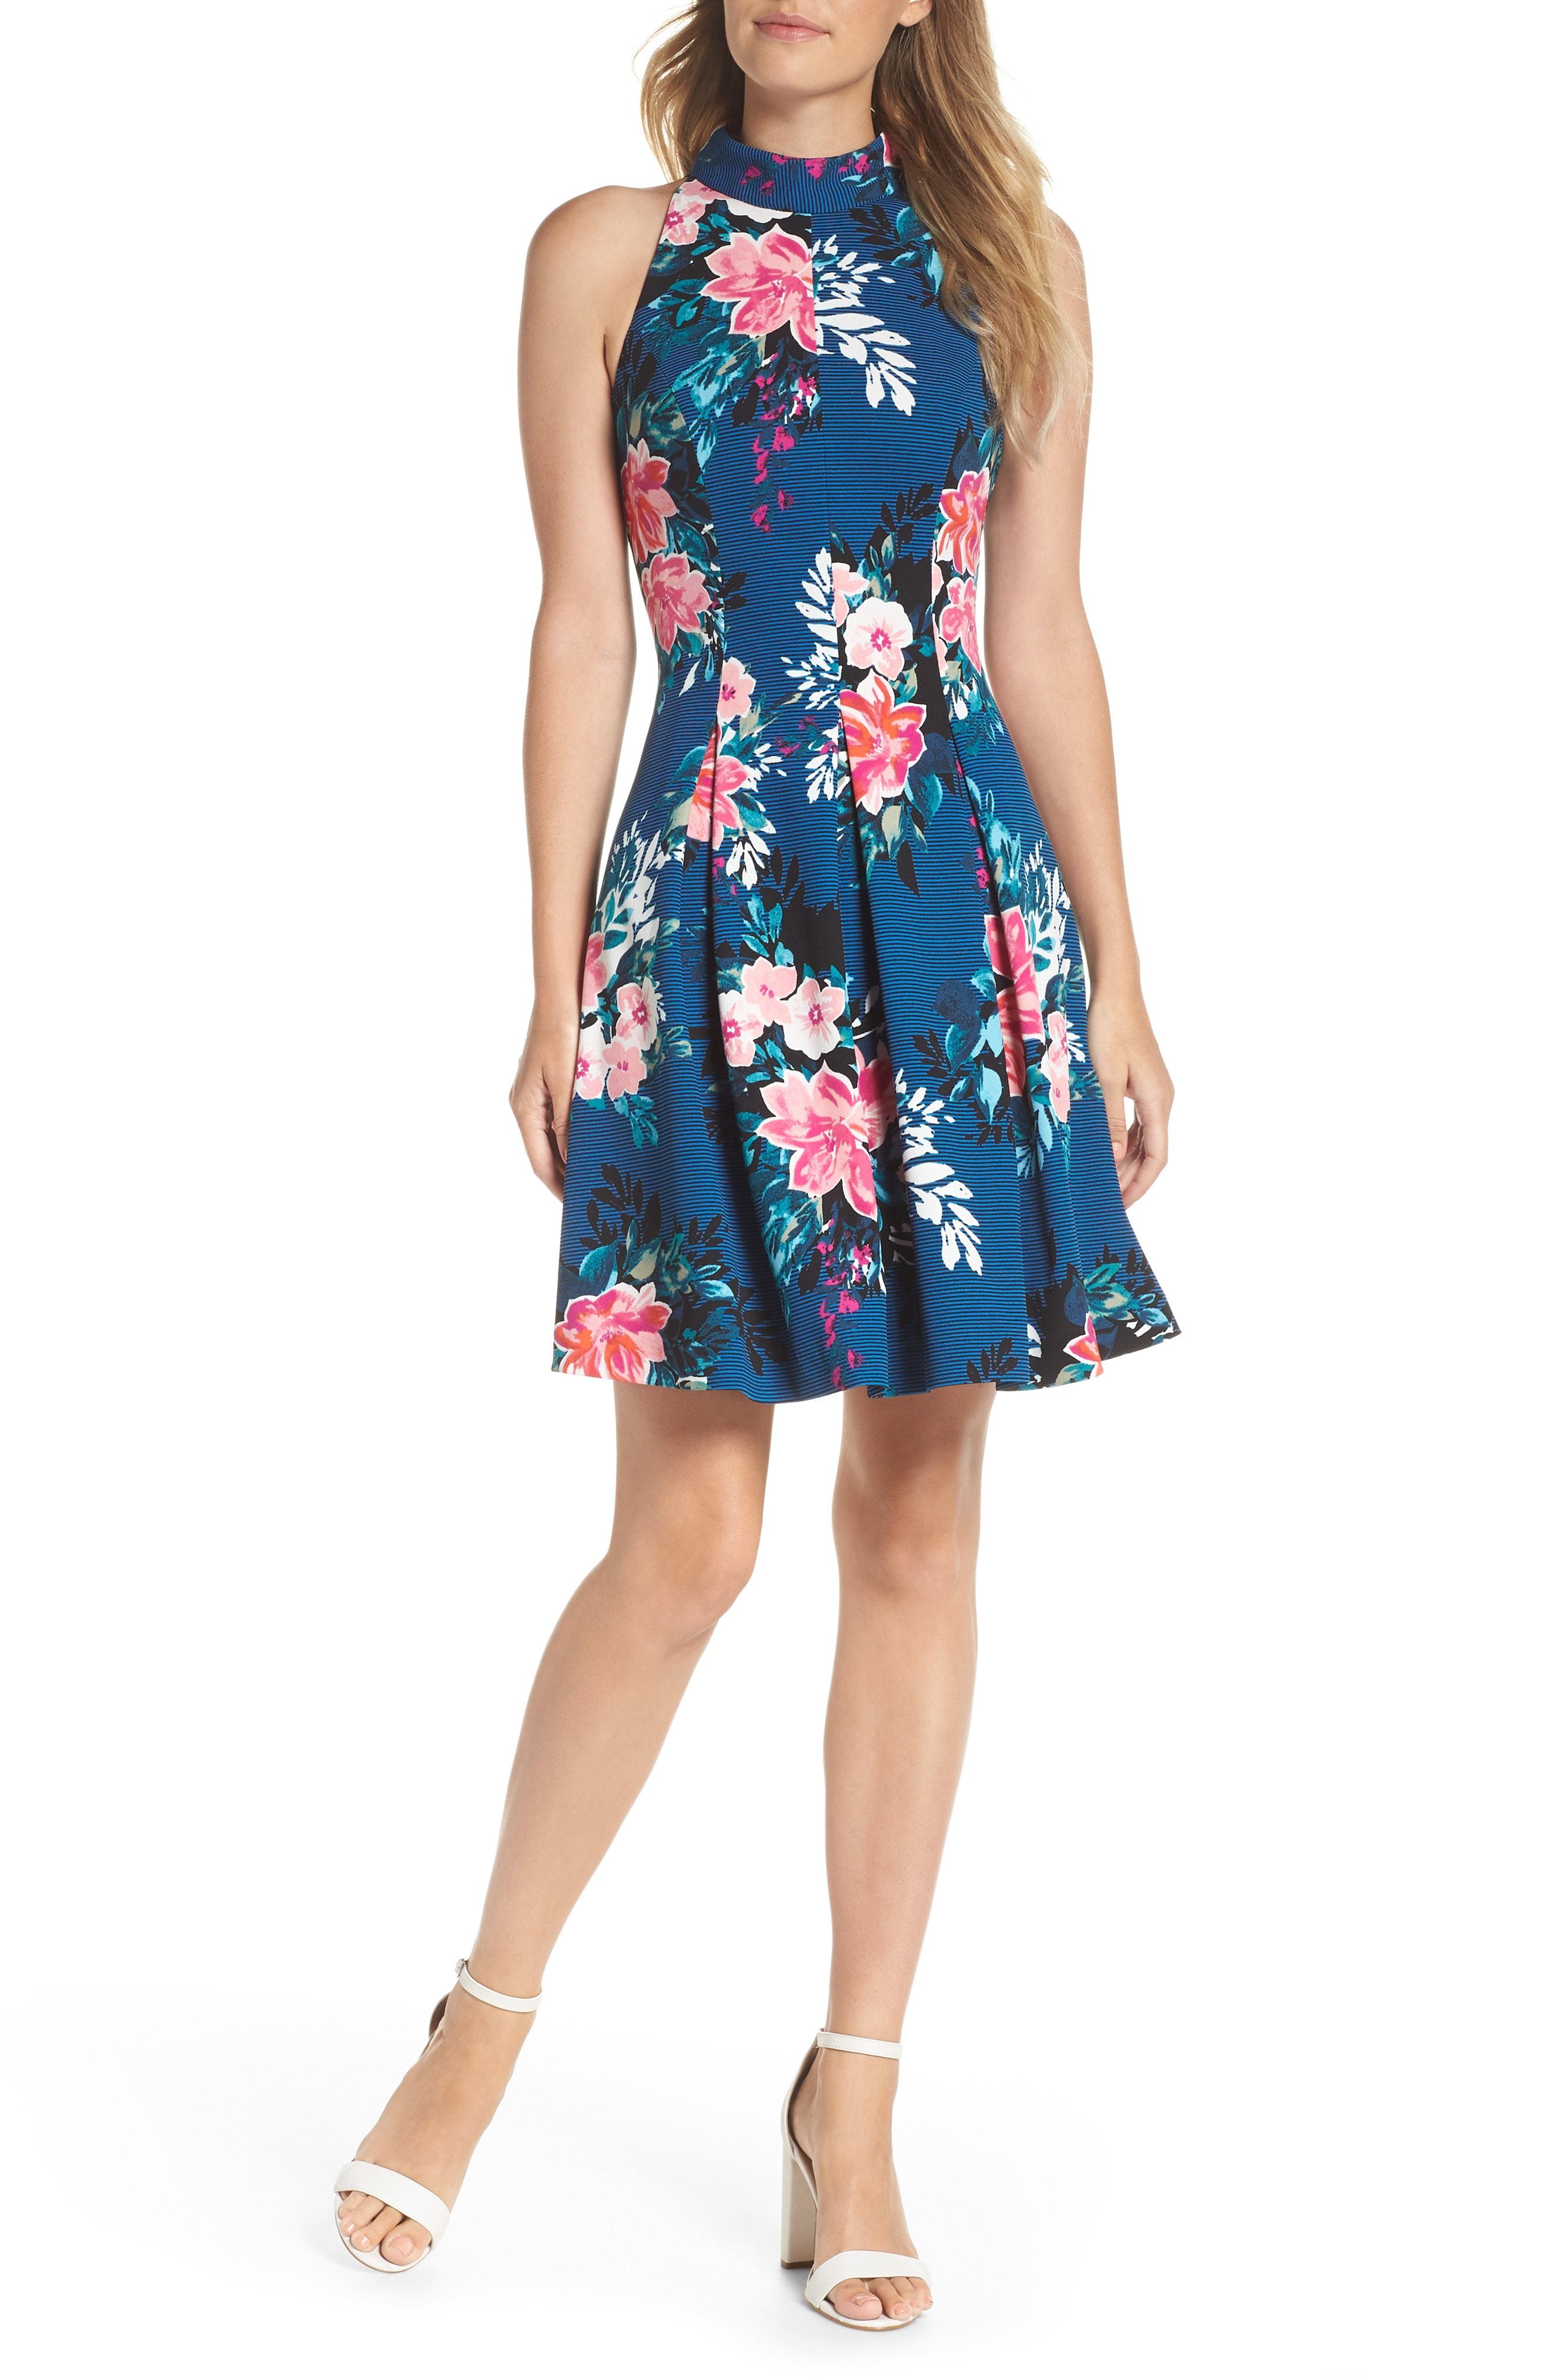 Vince Camuto Textured Floral Scuba Crepe Fit And Flare Dress, $71 